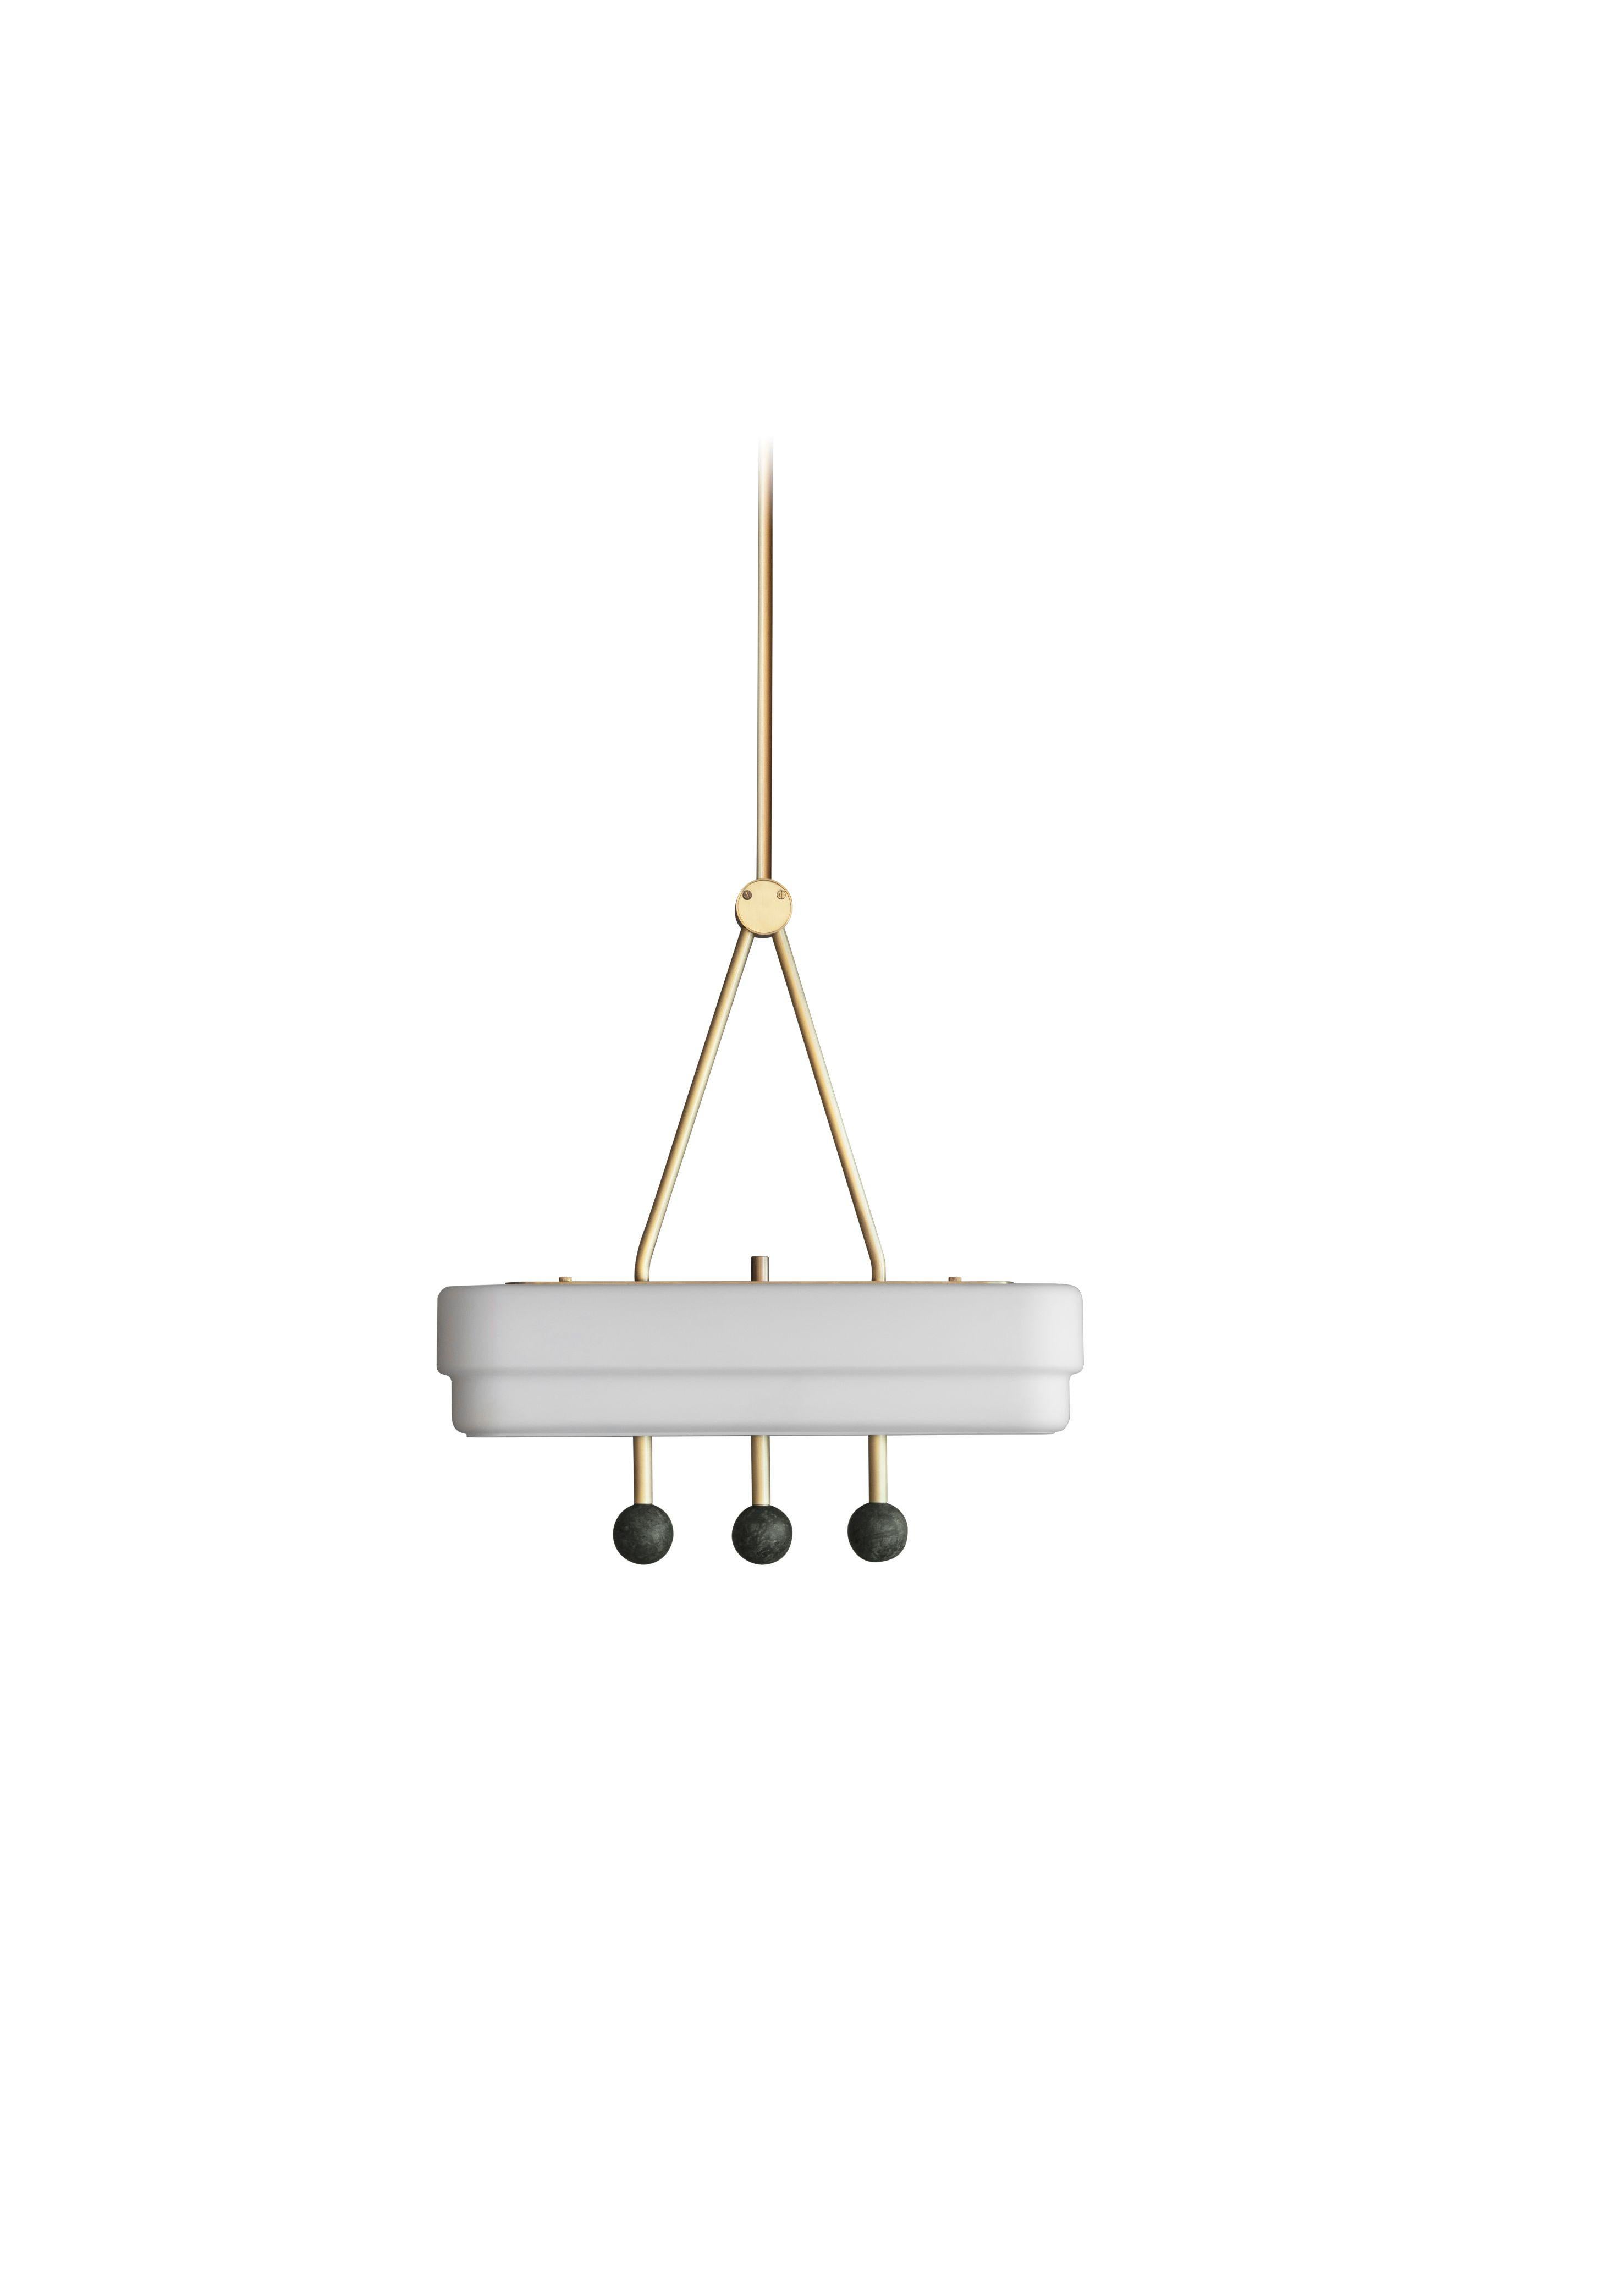 Green spate pendant by Bert Frank
Dimensions: H 44 x W 9 x D 44 cm
Materials: Brass, marble, glass

Available finishes: Bronzed brass, black brass
All our lamps can be wired according to each country. If sold to the USA it will be wired for the